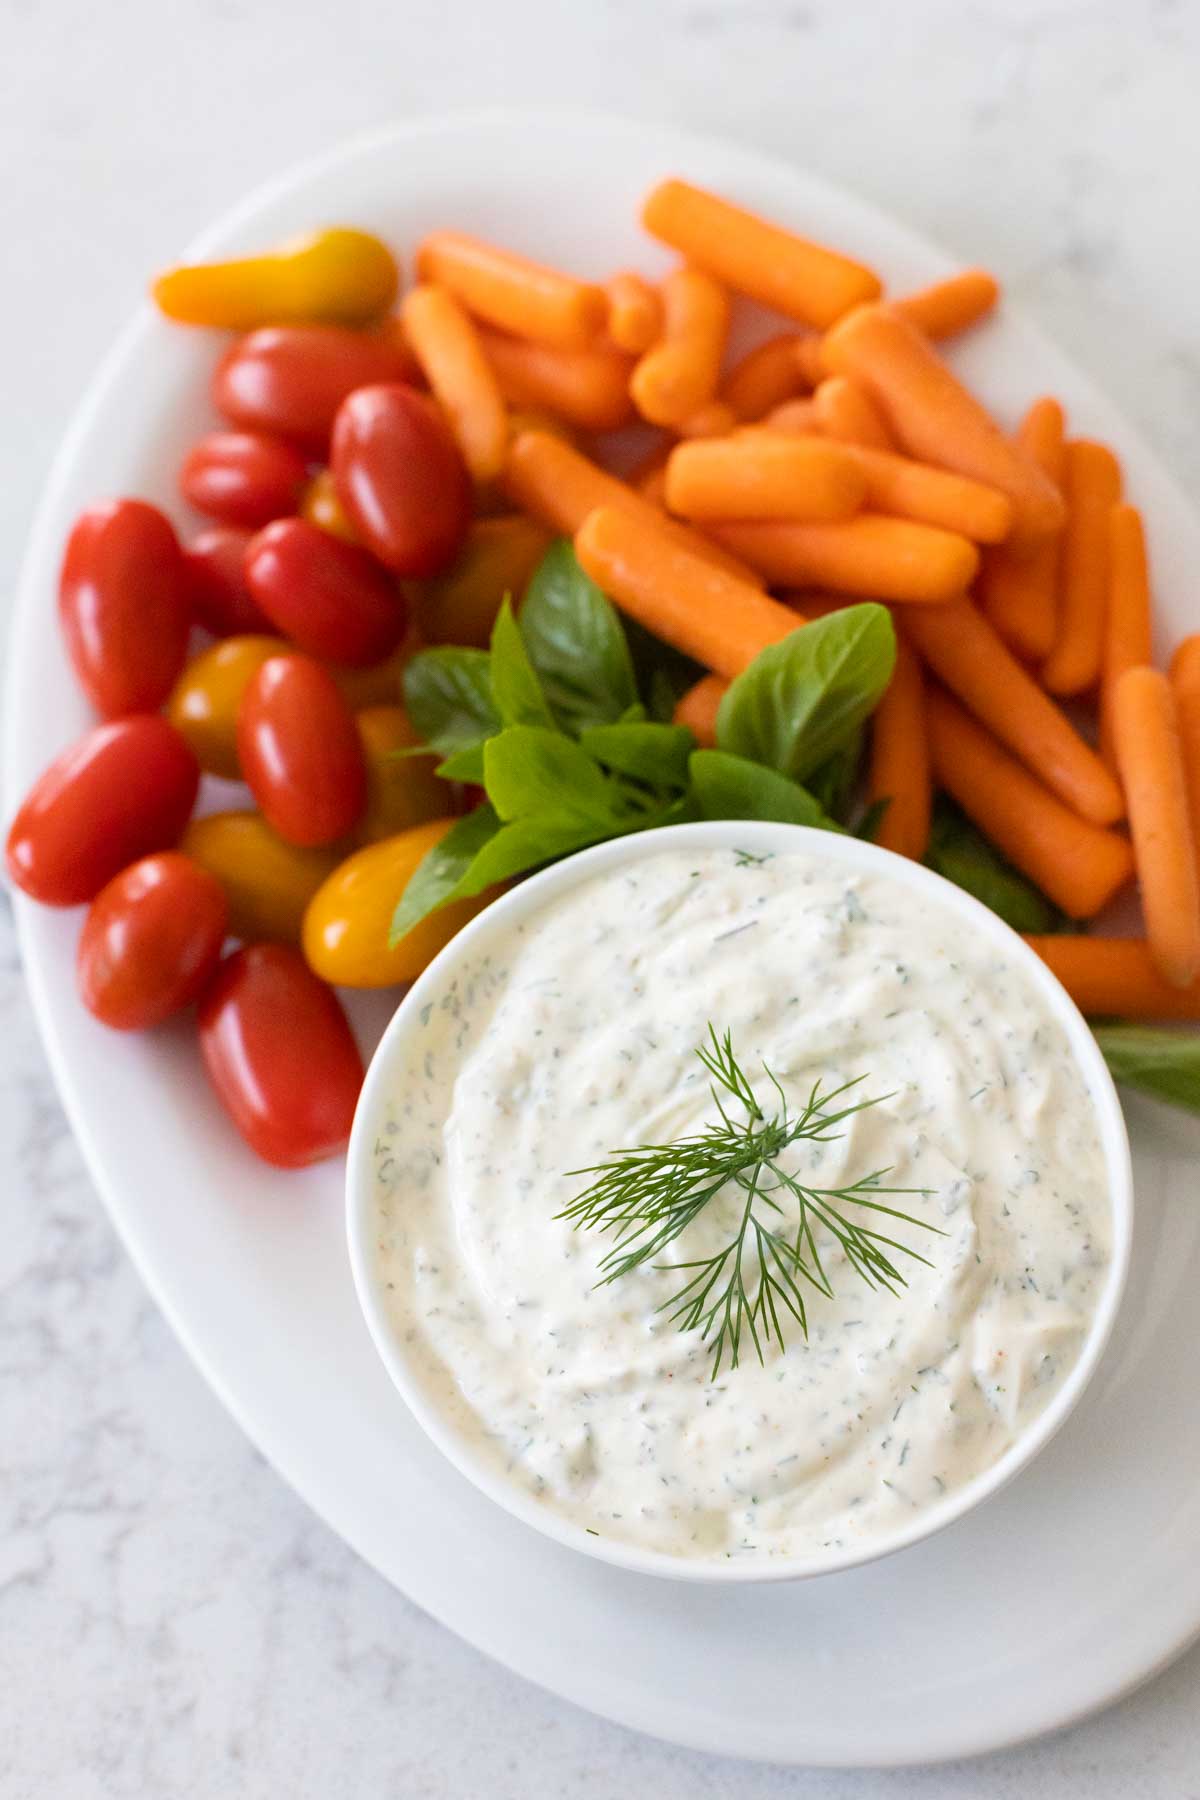 A bowl of dill dip has a sprig of dill on the top. The platter has cherry tomatoes, baby carrots, and a sprig of green basil for color.